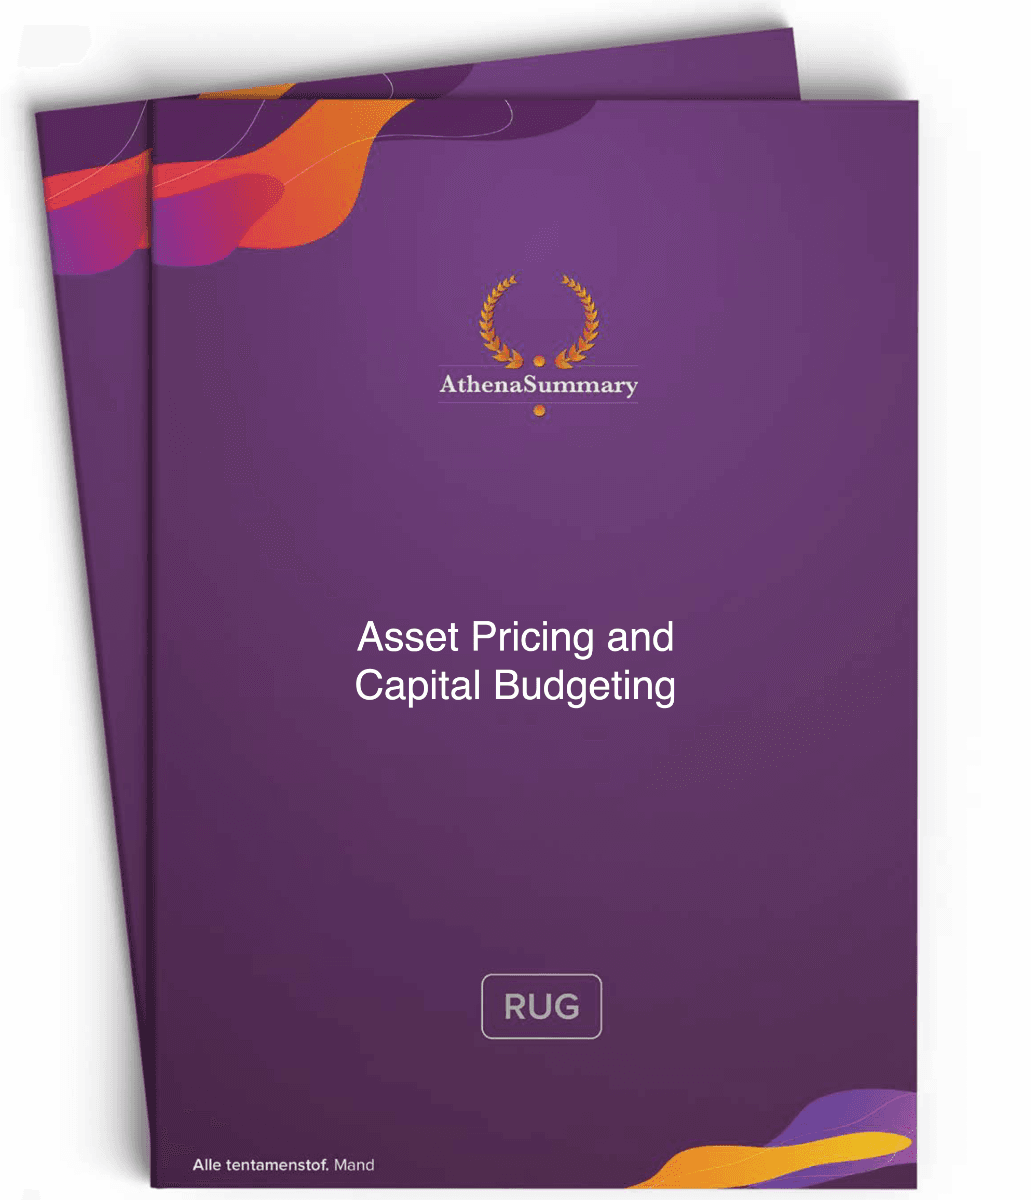 Literature Summary - Asset Pricing and Capital Budgeting